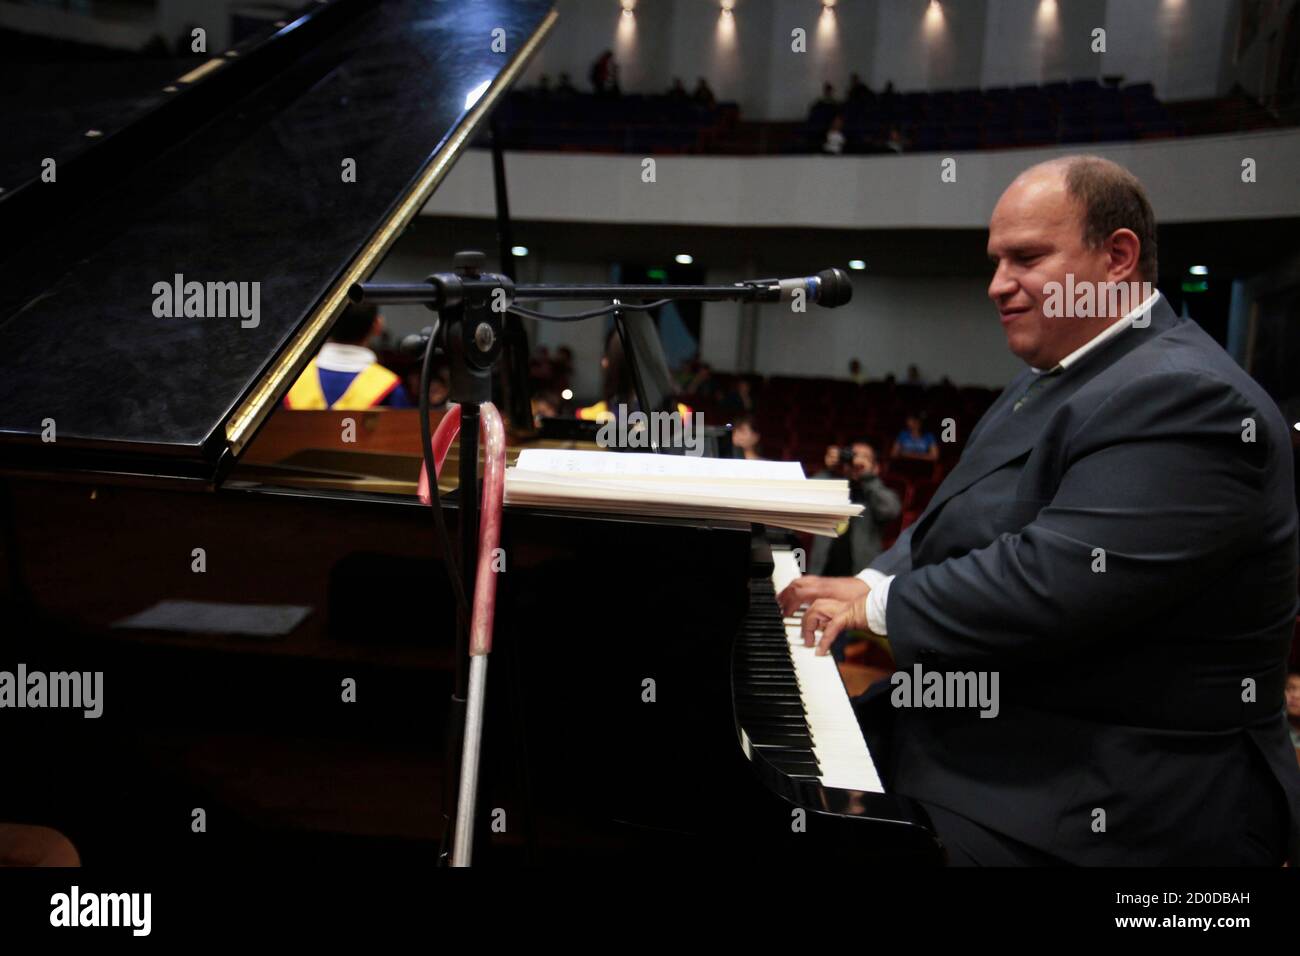 Francisco Morales, a visually impaired musician of the Santa Lucia Chorus,  plays the piano during a performance in the conservatory in Guatemala City  July 22, 2012. The Santa Lucia Chorus, which is